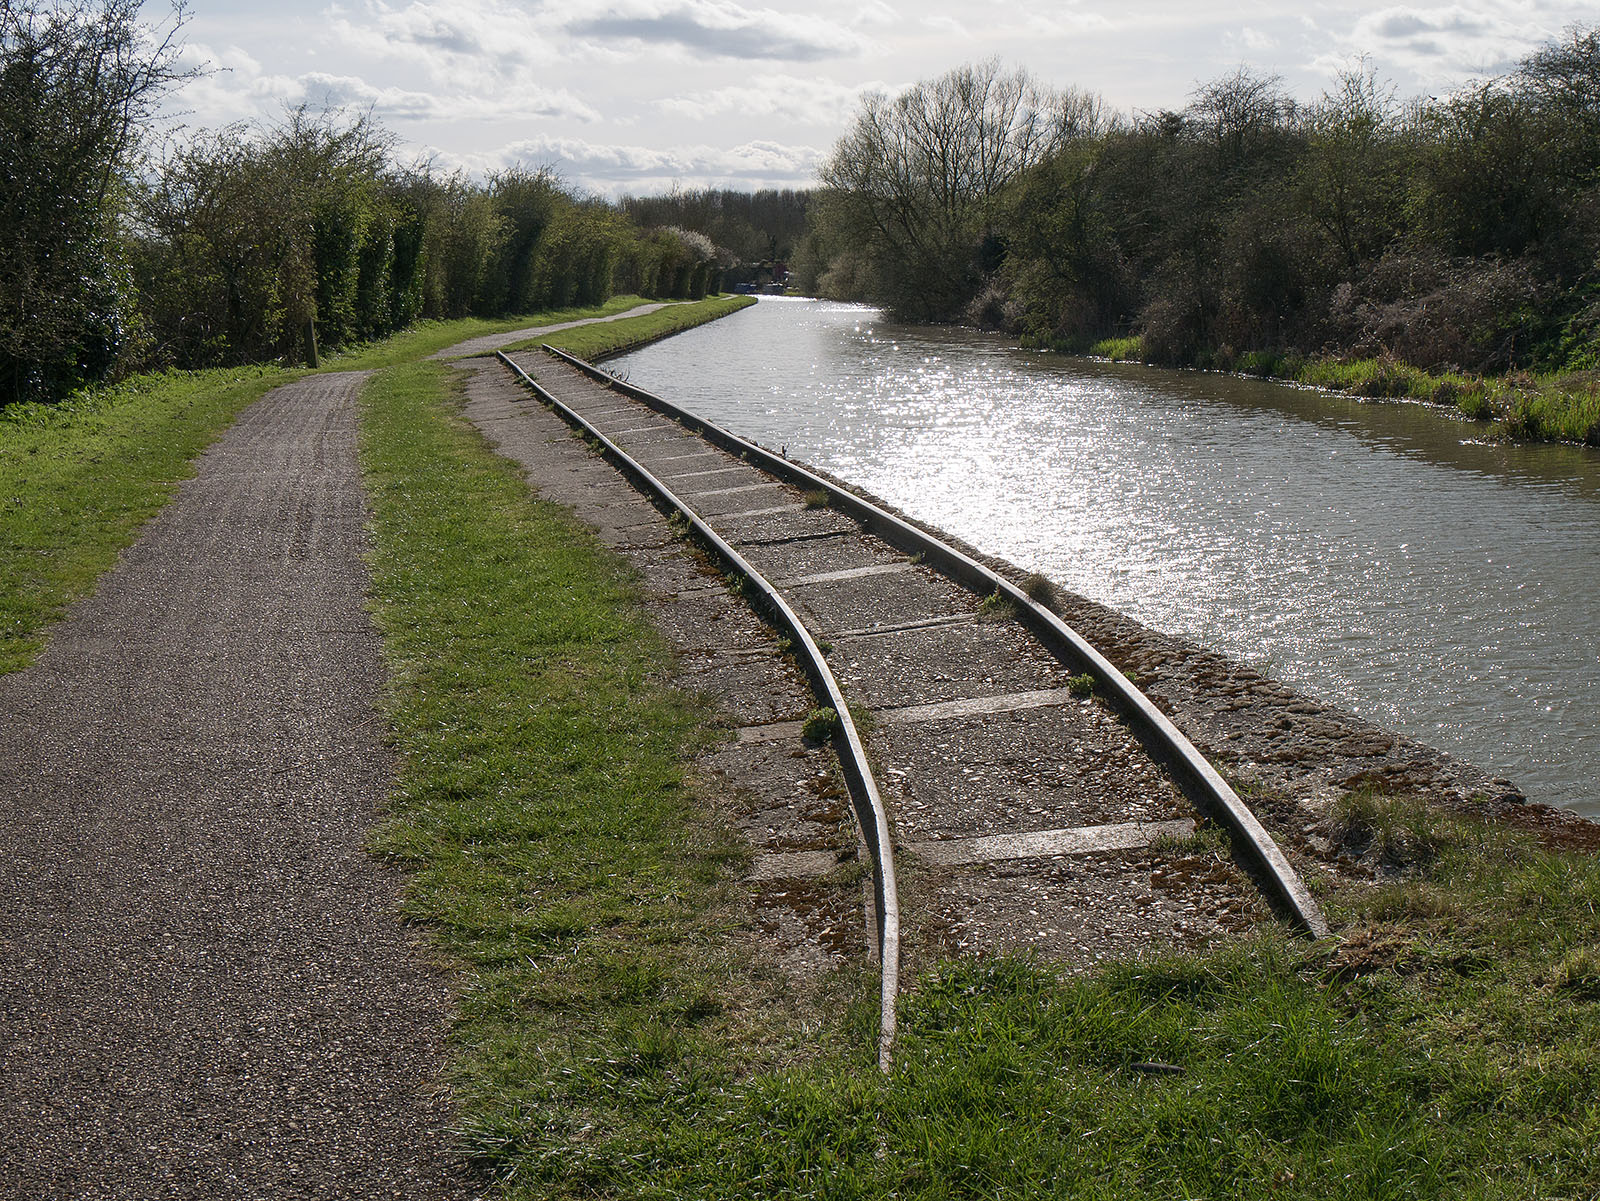 Mysterious tracks curve away from the canal